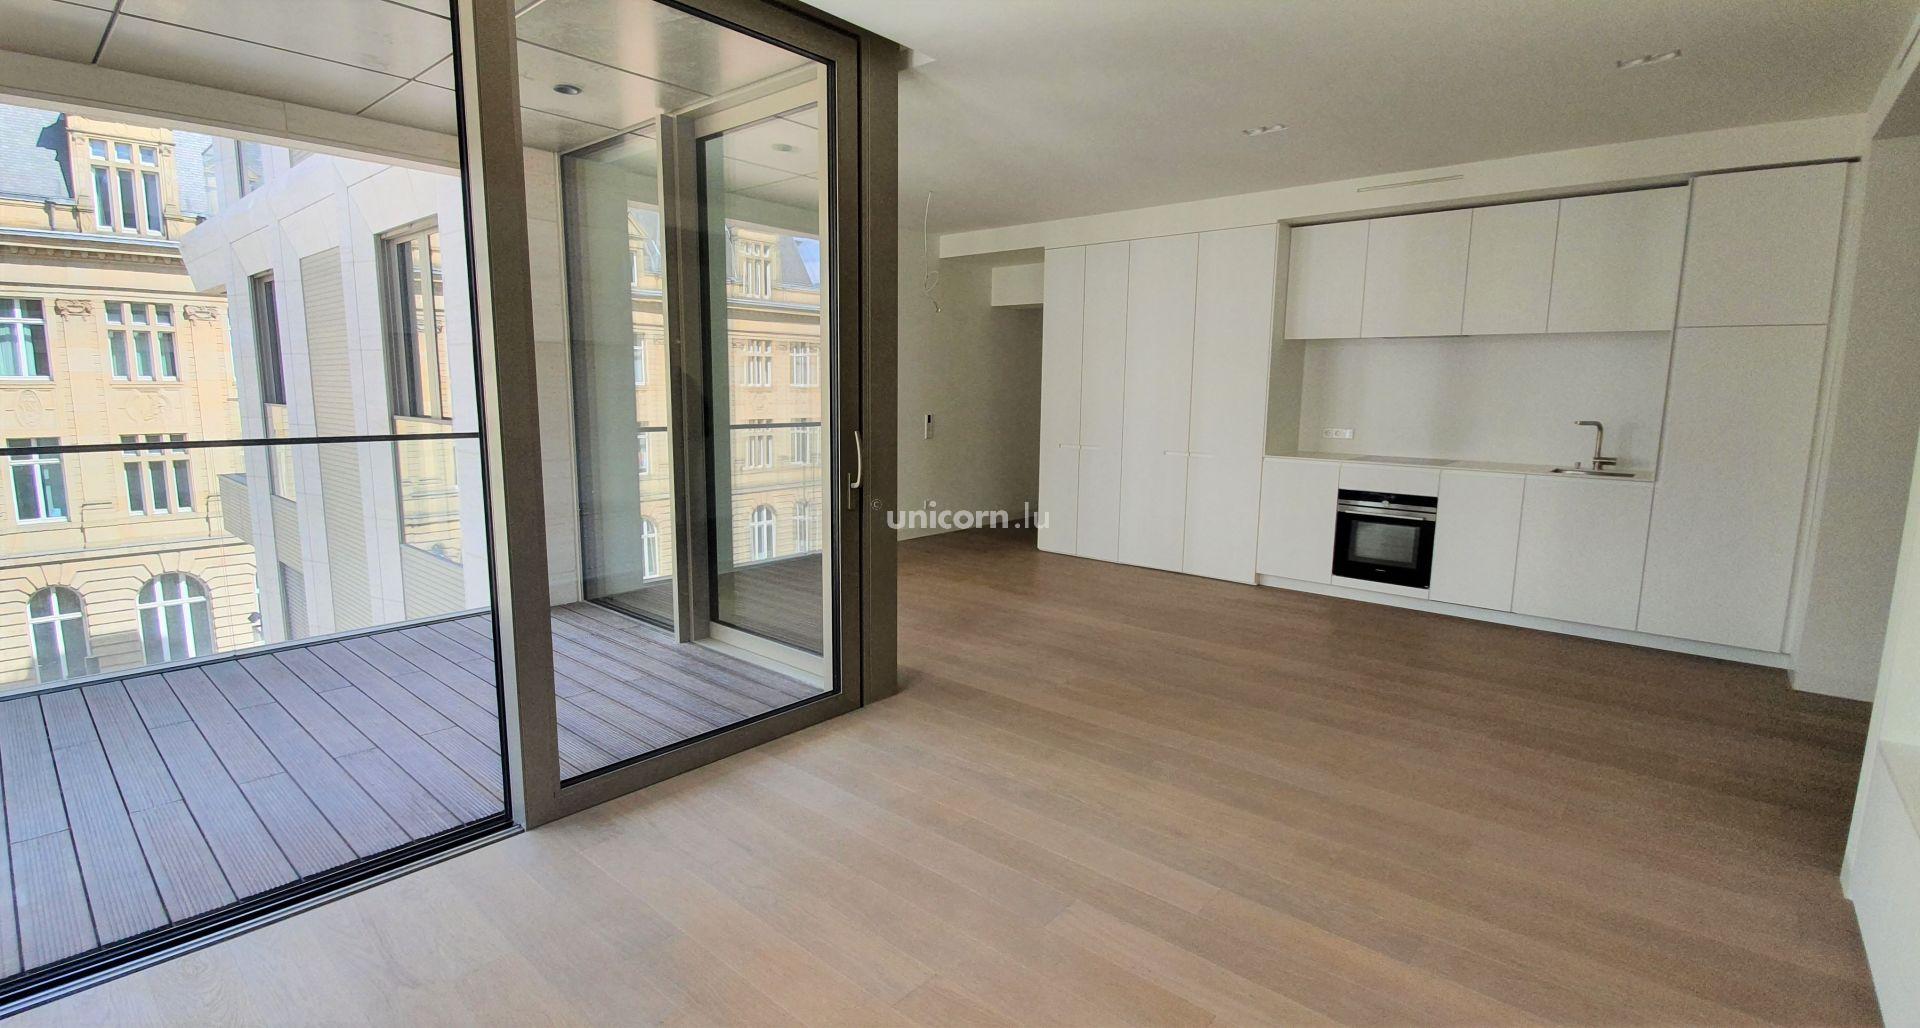 Apartment for rent in Luxembourg  - 62m²